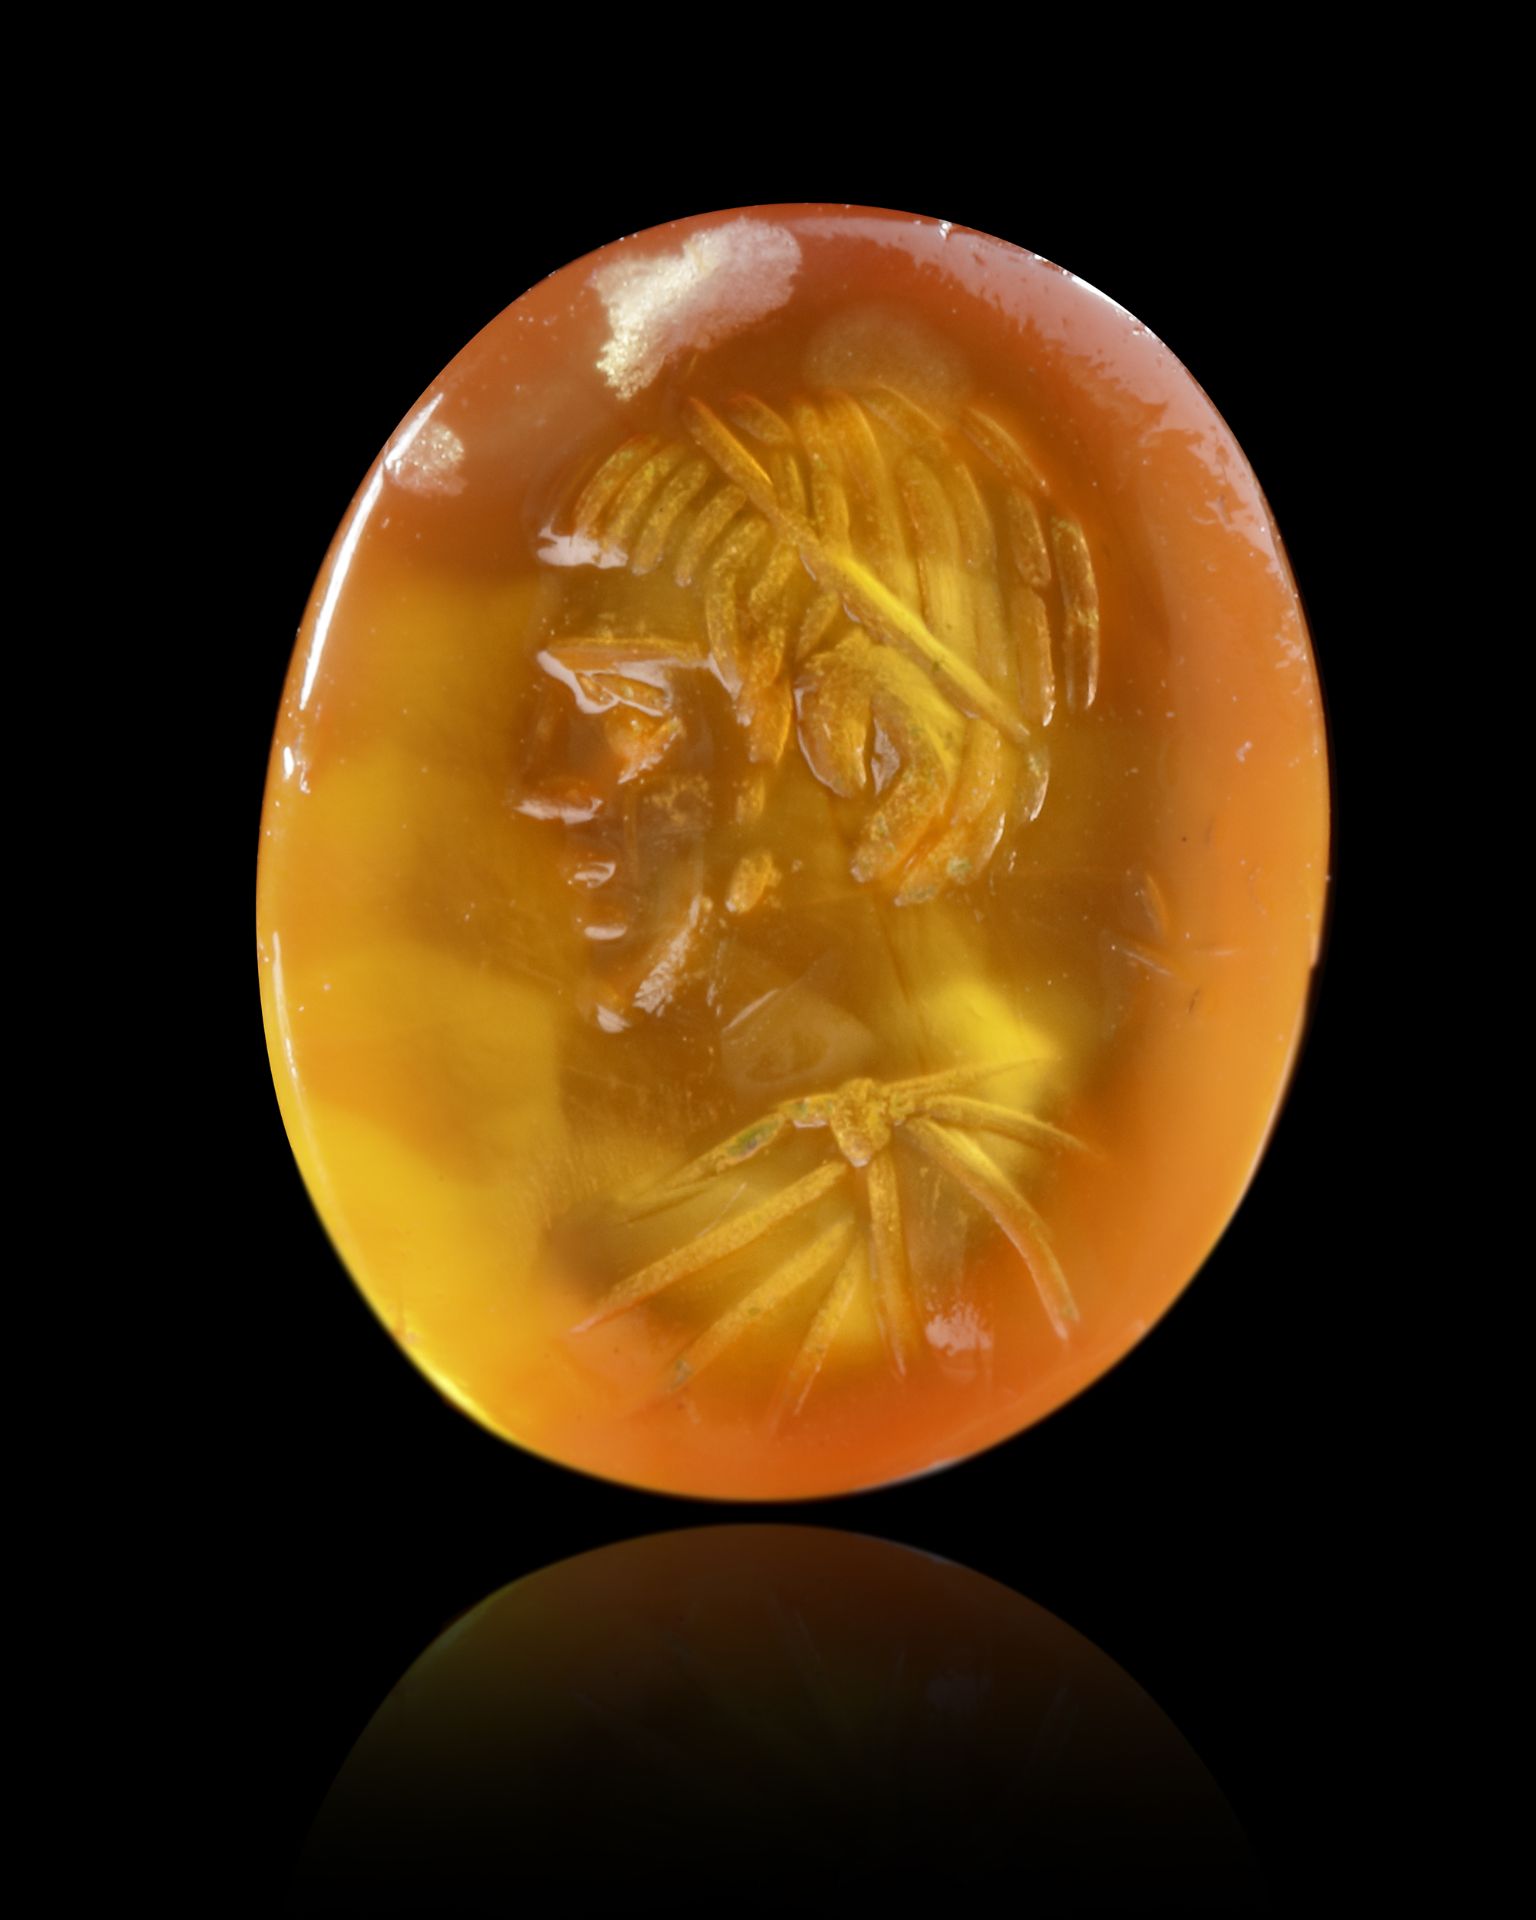 A ROMAN CARNELIAN INTAGLIO WITH A PORTRAIT OF A YOUNG MAN, 2ND-3RD CENTURY AD